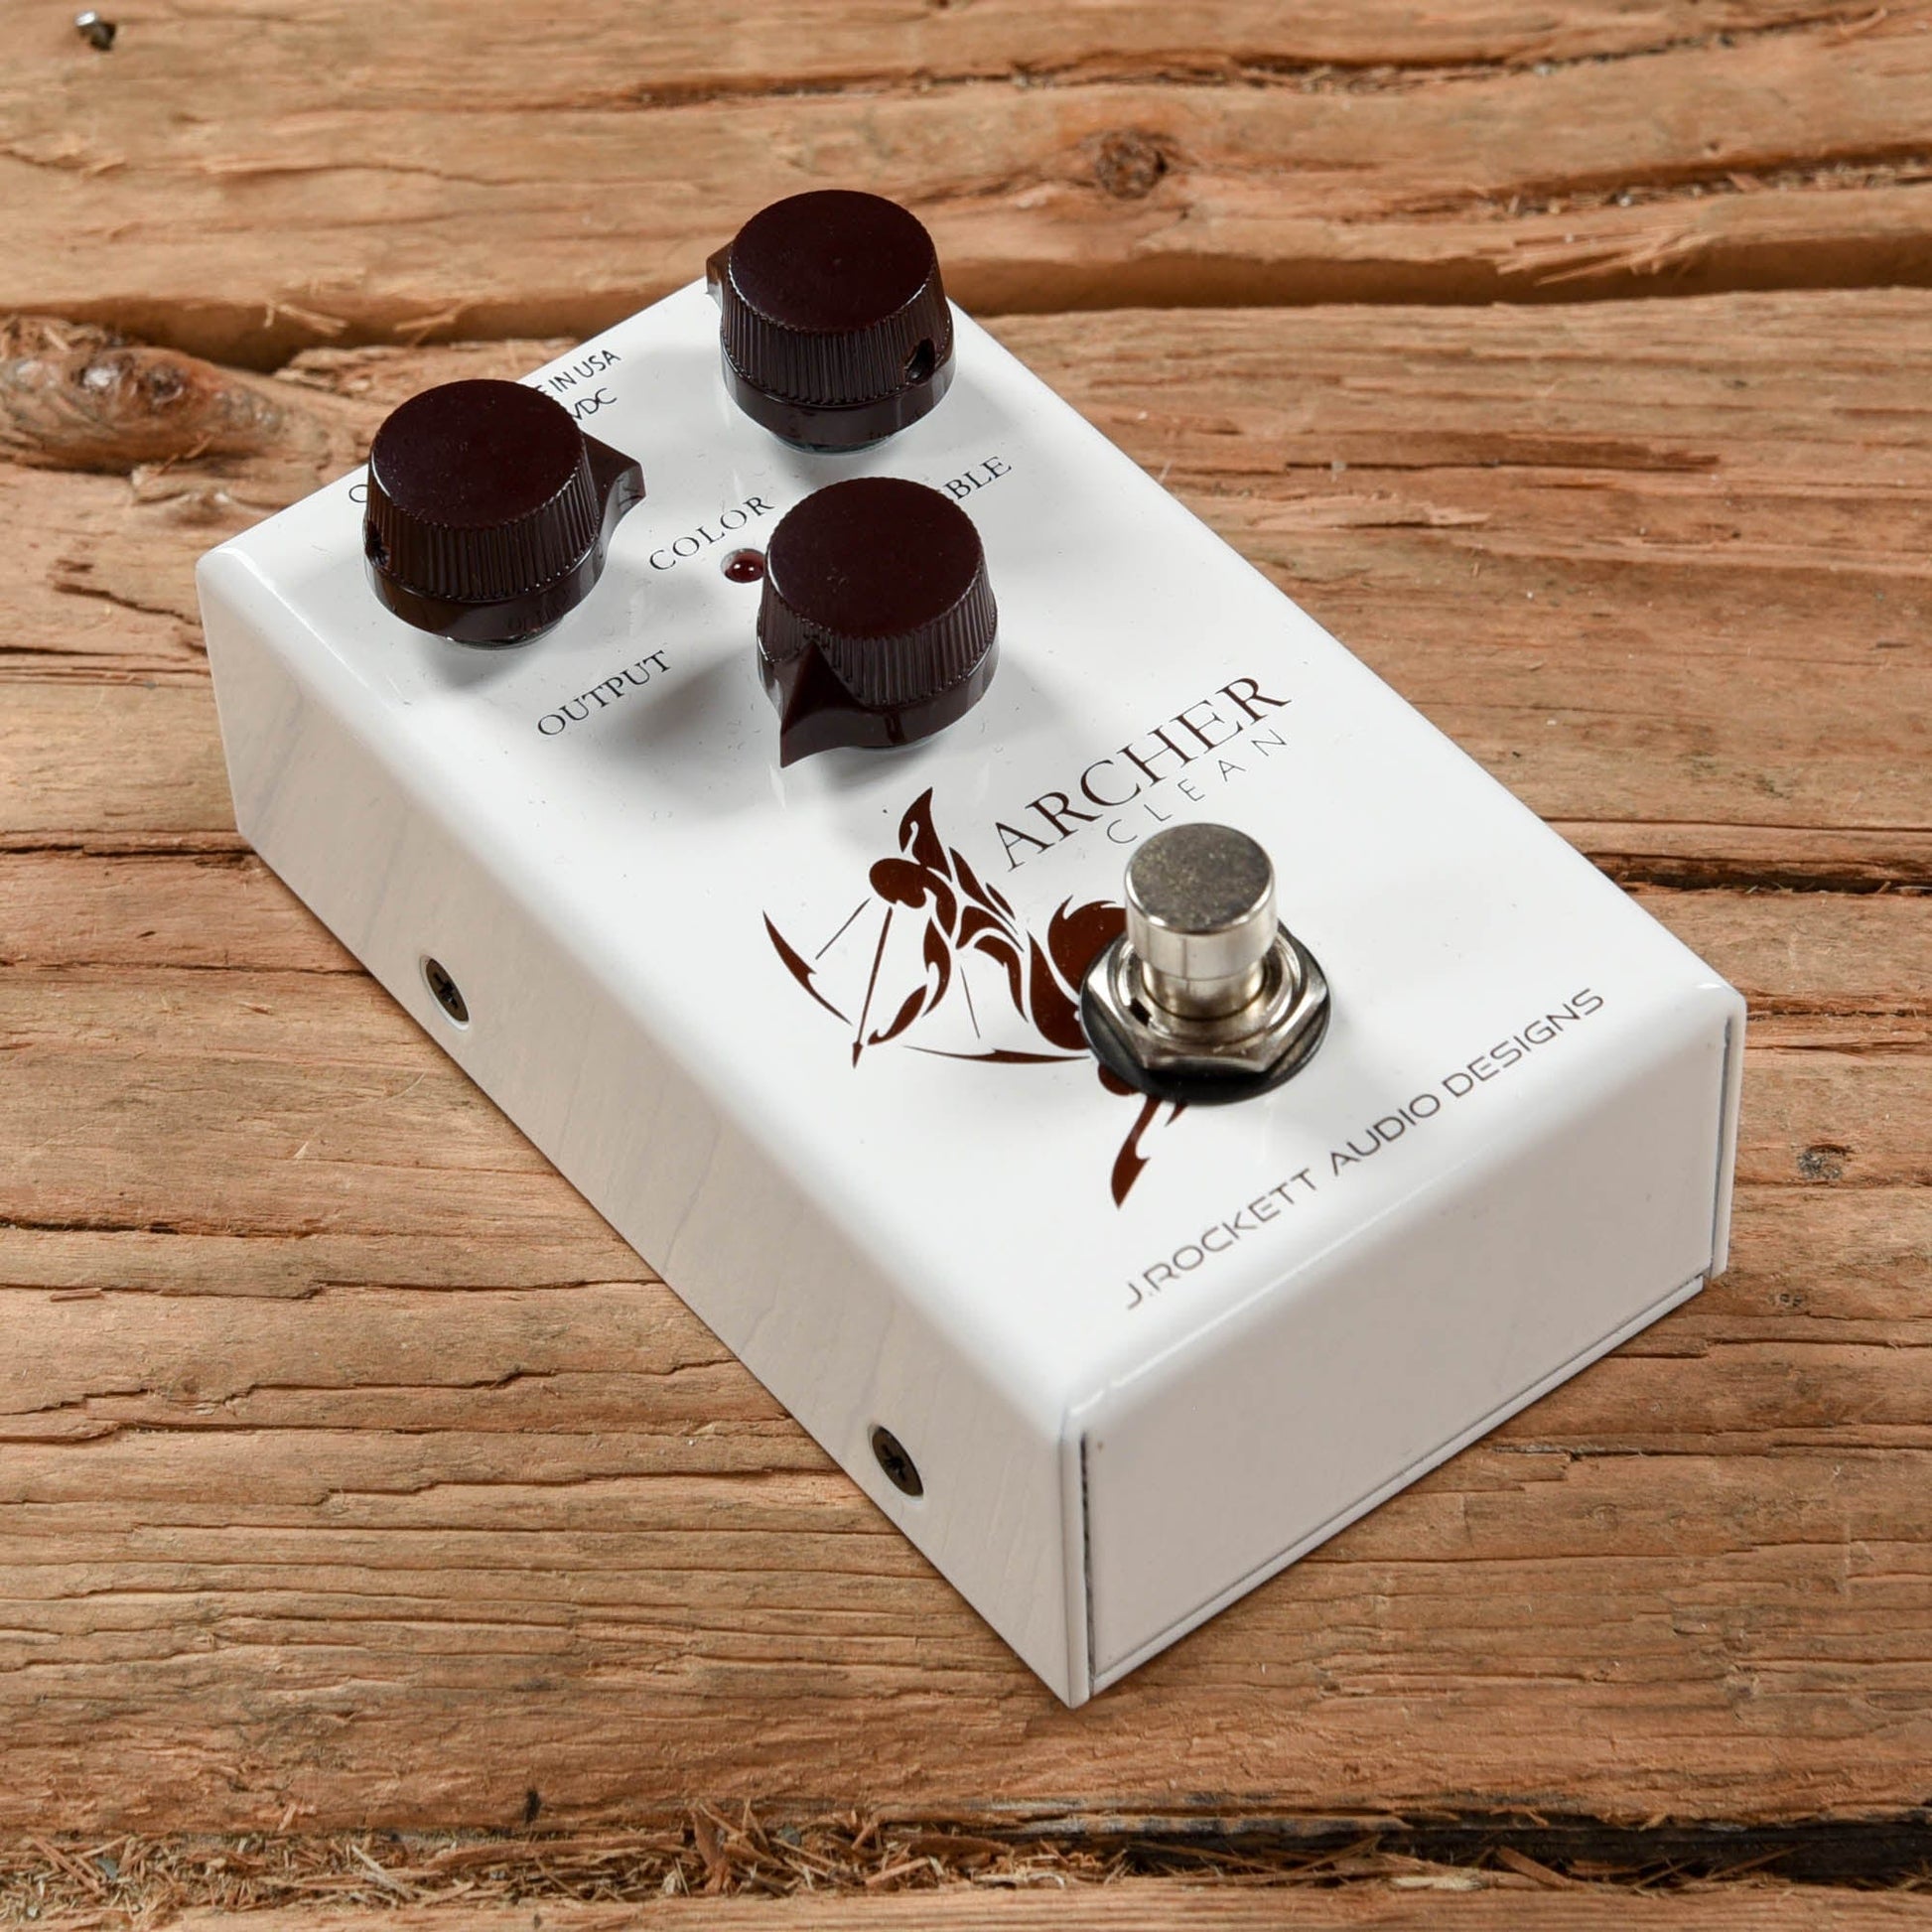 J.Rockett Archer Clean Effects and Pedals / Overdrive and Boost